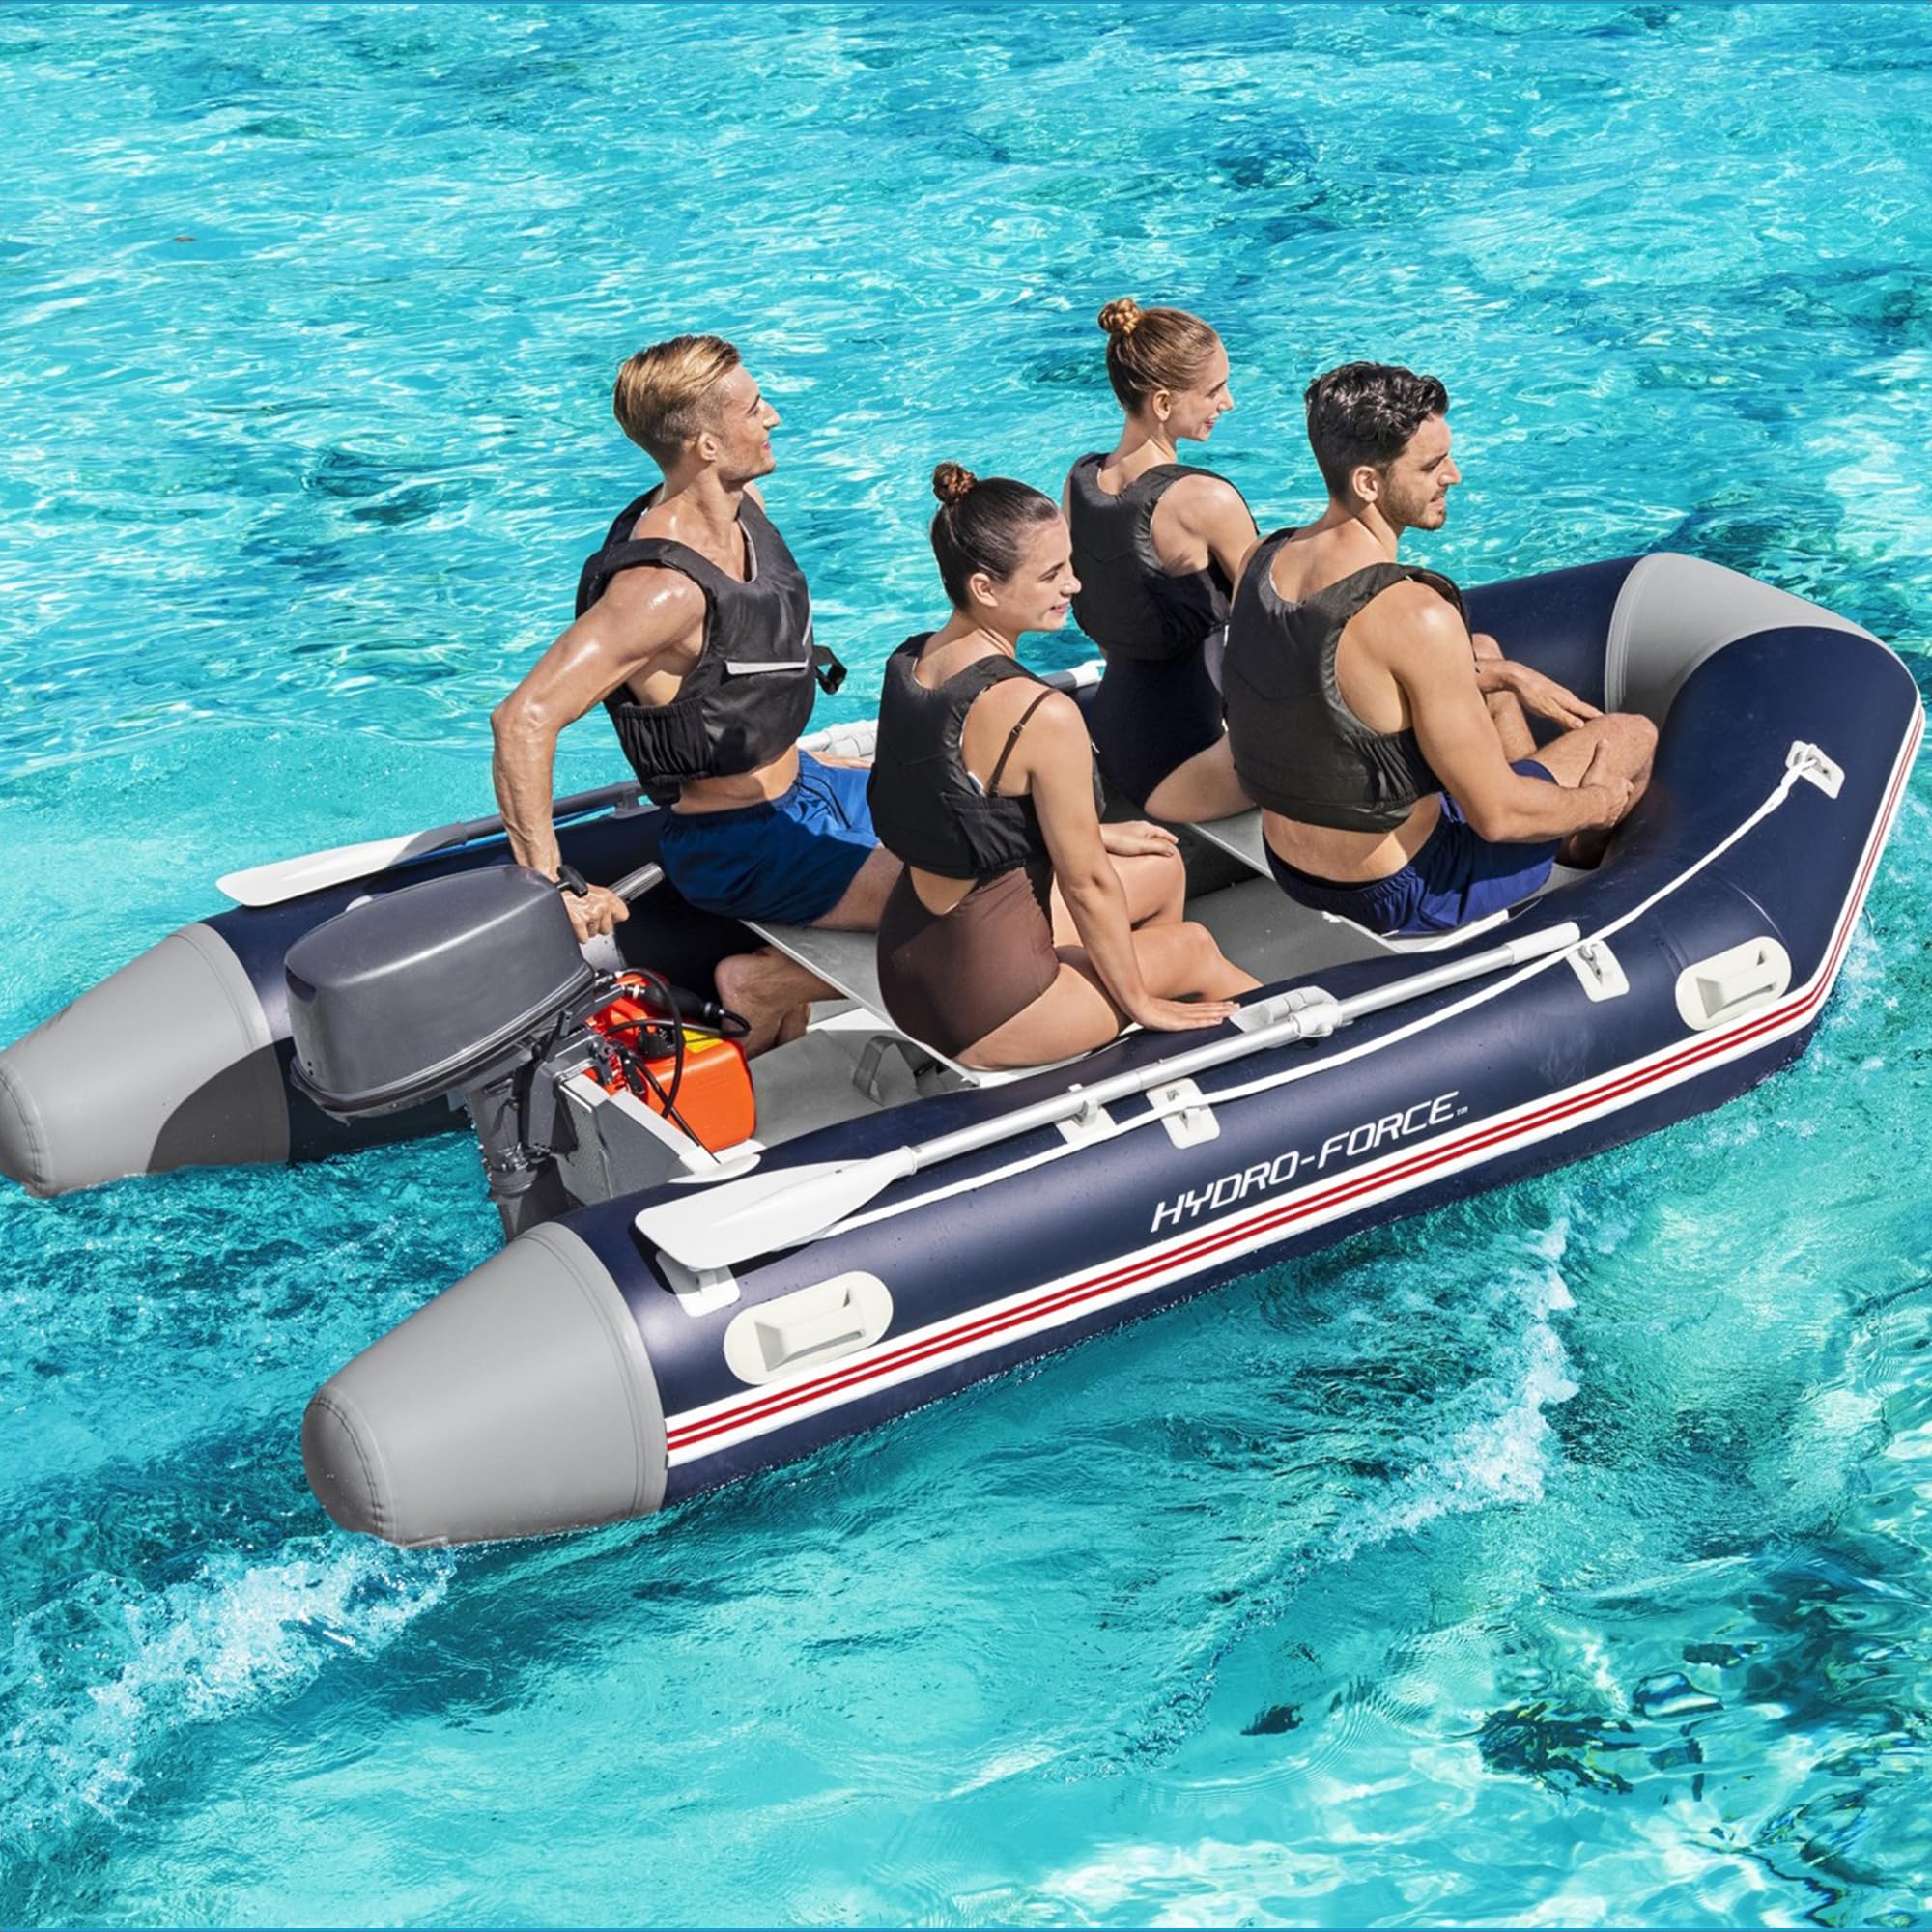 Bestway Hydro-Force Mirovia Pro Inflatable 5 Person Outdoor Water Lake Raft Boat Set with 2 Aluminum Oars, Hand Pump, Pressure Gauge, and Repair Patch